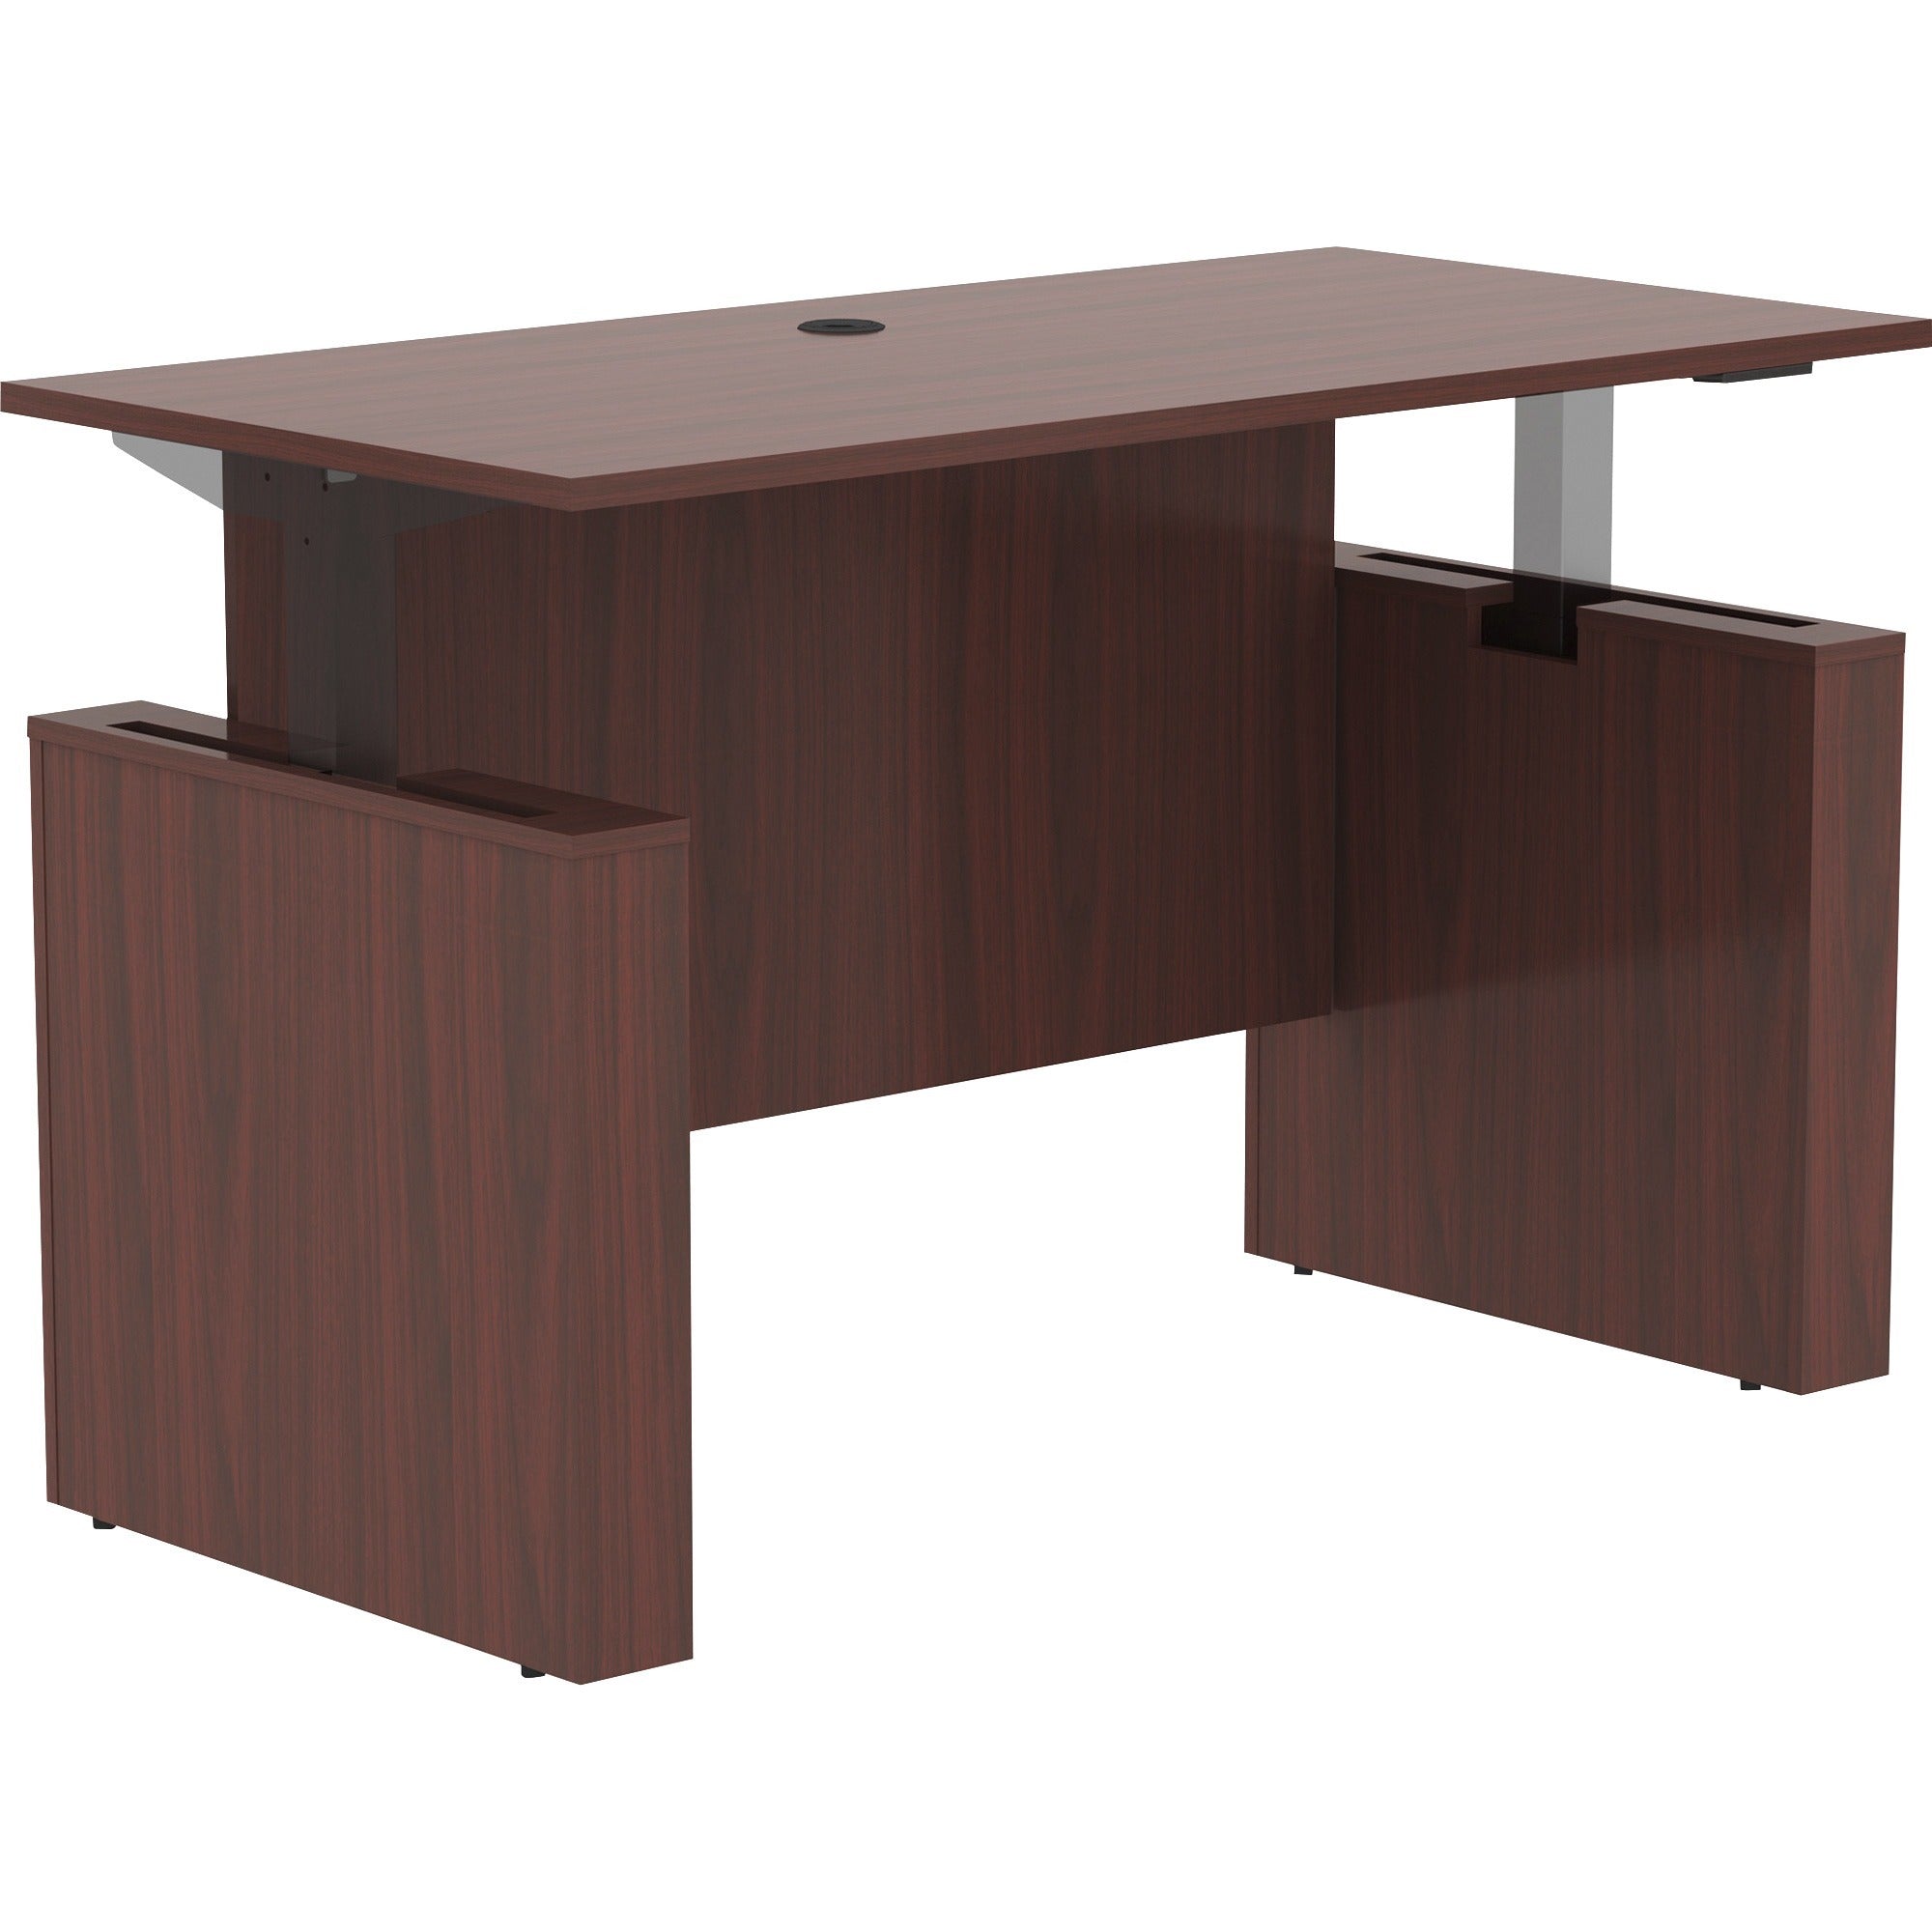 lorell-essentials-series-sit-to-stand-desk-shell-01-top-1-edge-60-x-2949-finish-mahogany-mahogany-laminate-table-top_llr69571 - 1